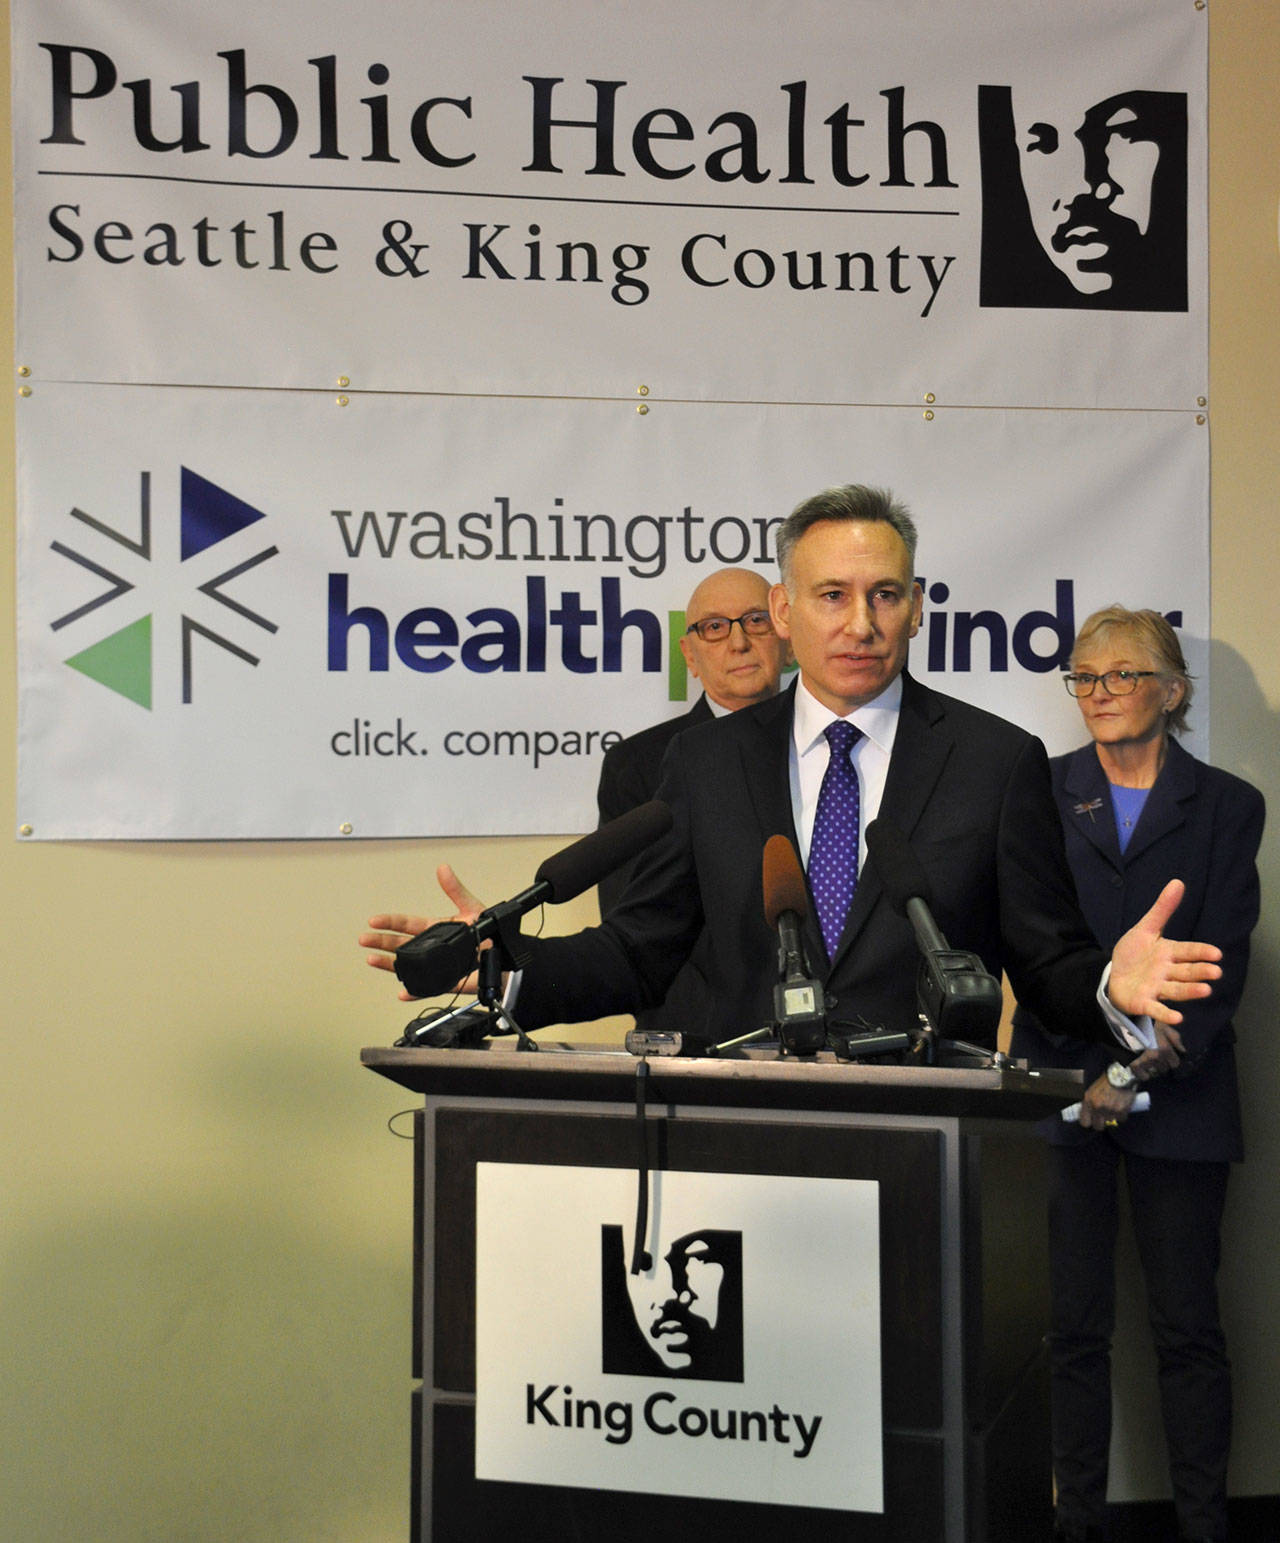 King County Executive Dow Constantine encourages residents to sign up for health care at the opening of a health care enrollment center in Federal Way on Wednesday. HEIDI SANDERS, the Mirror